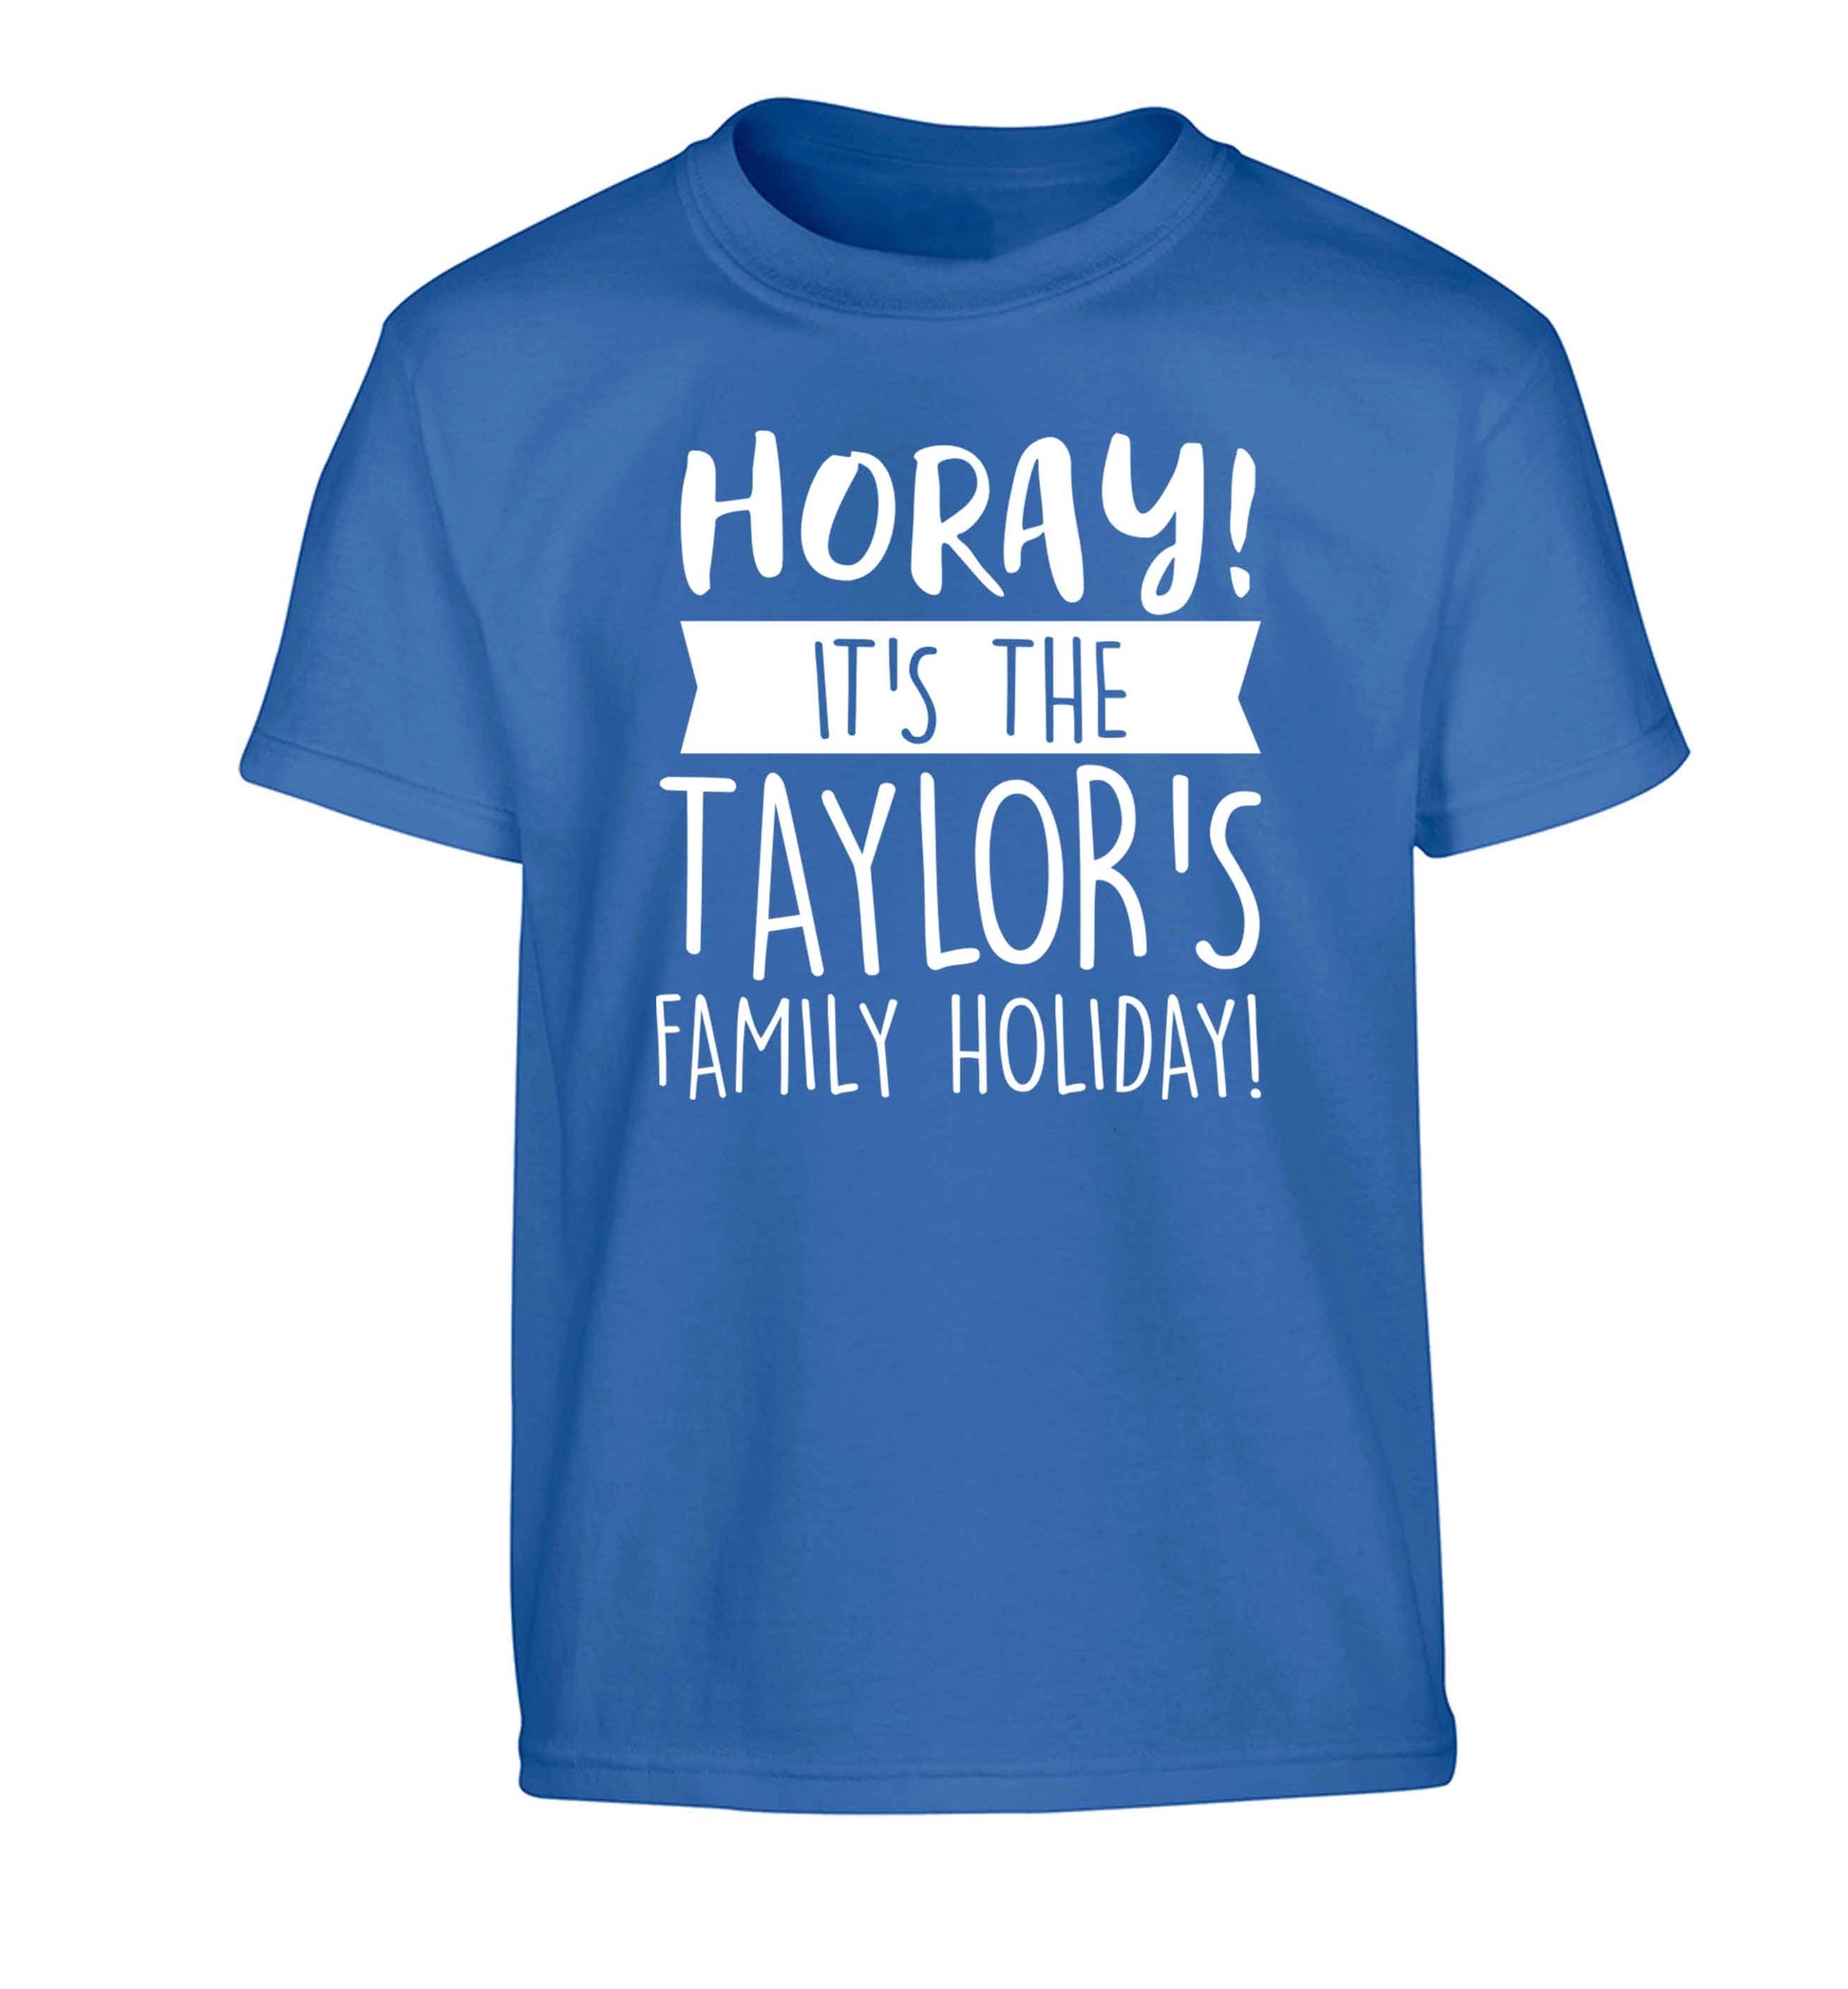 Horay it's the Taylor's family holiday! personalised item Children's blue Tshirt 12-13 Years